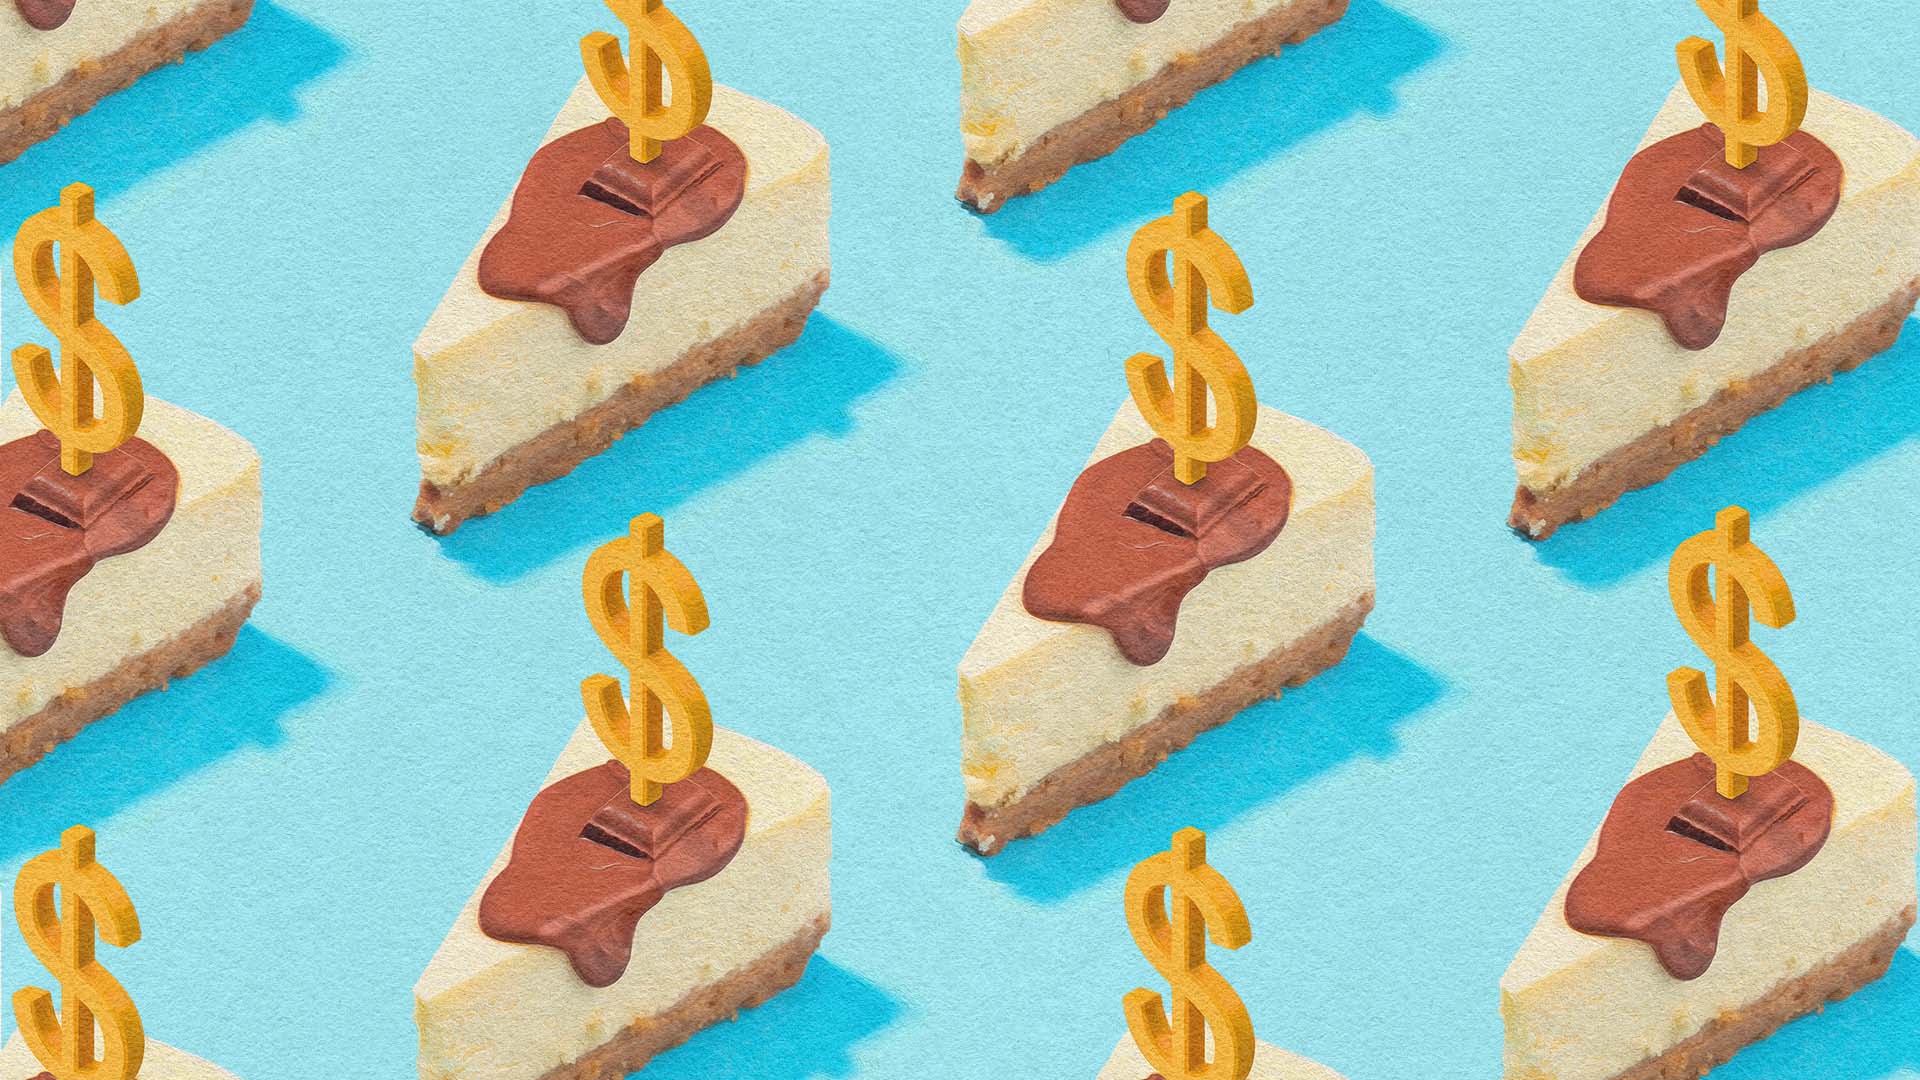 Illustration of chocolate cheesecake slices with dollar-sign cake toppers arranged in a grid pattern on a blue background.